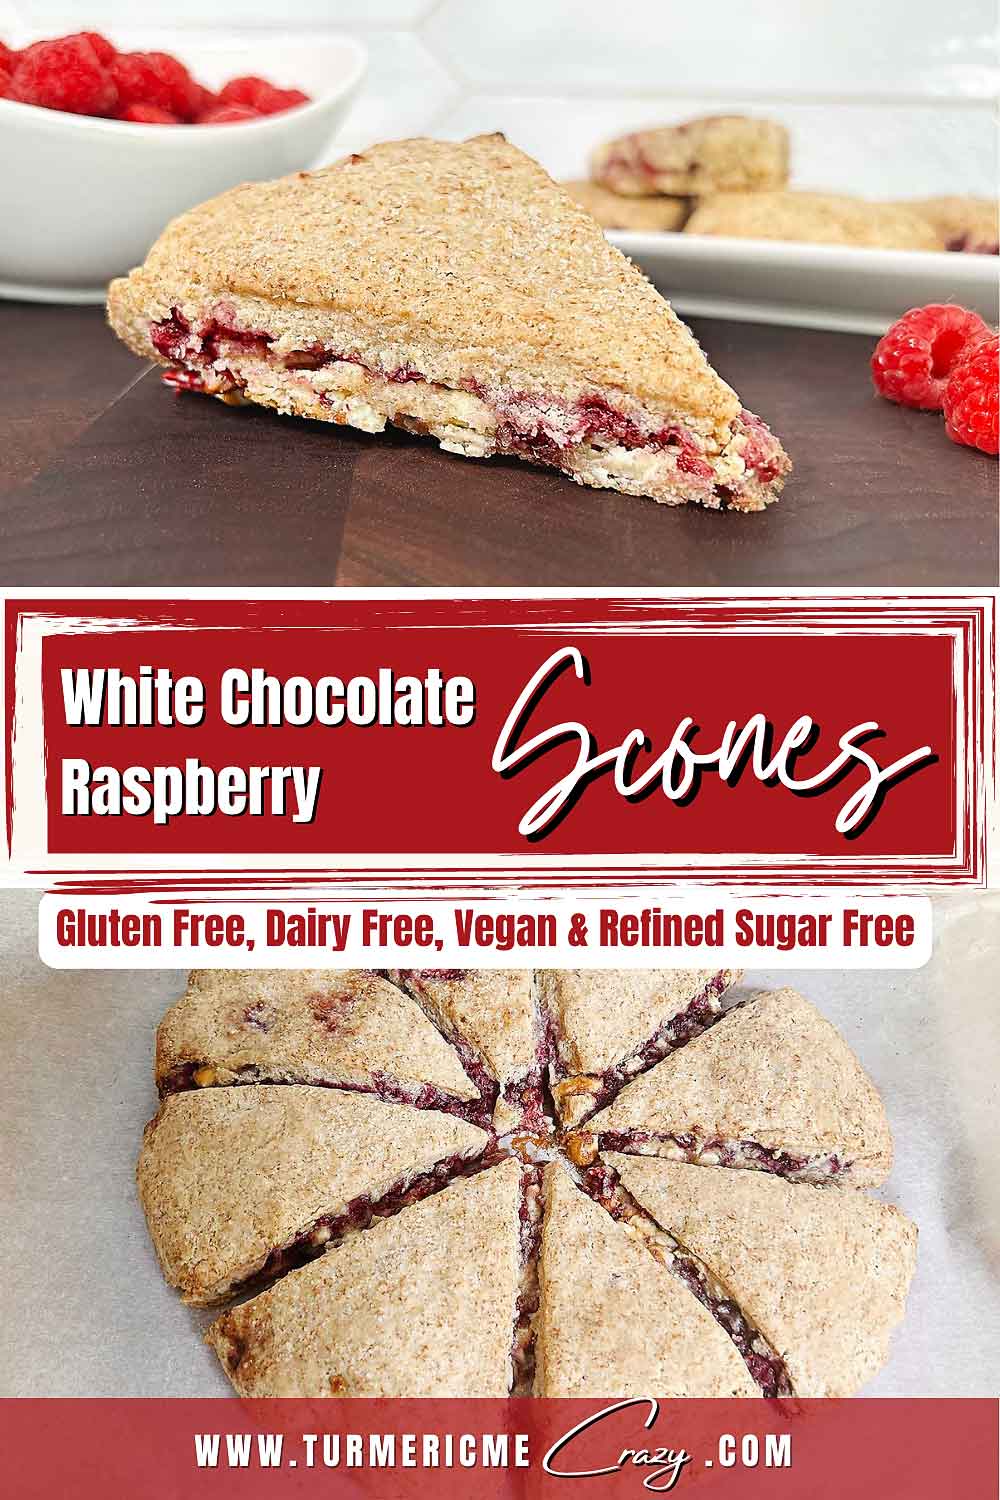 These incredibly delicious White Chocolate Raspberry Scones are gluten free, dairy free & also vegan! Free from processed sugars & additives, these scones will blow you away! white chocolate raspberry scones, gluten free scones, scones, gluten free & vegan recipes, scone recipe, gluten and corn free recipes gluten and dairy free gluten dairy egg corn free, gluten egg and corn free recipes, gluten free & dairy free recipes, gluten free & vegan, gluten free baking, gluten free bakes, gluten free treats, baking, biscuits, dairy free recipes, egg free baking, egg free recipes, gluten free vegan dessert, gluten free biscuits, gluten free dessert, gluten free diet, gluten free muffins, gluten free vegan recipes, psyllium husk, sorghum flour recipe, turmericmecrazy, vegan desserts, vegan recipes